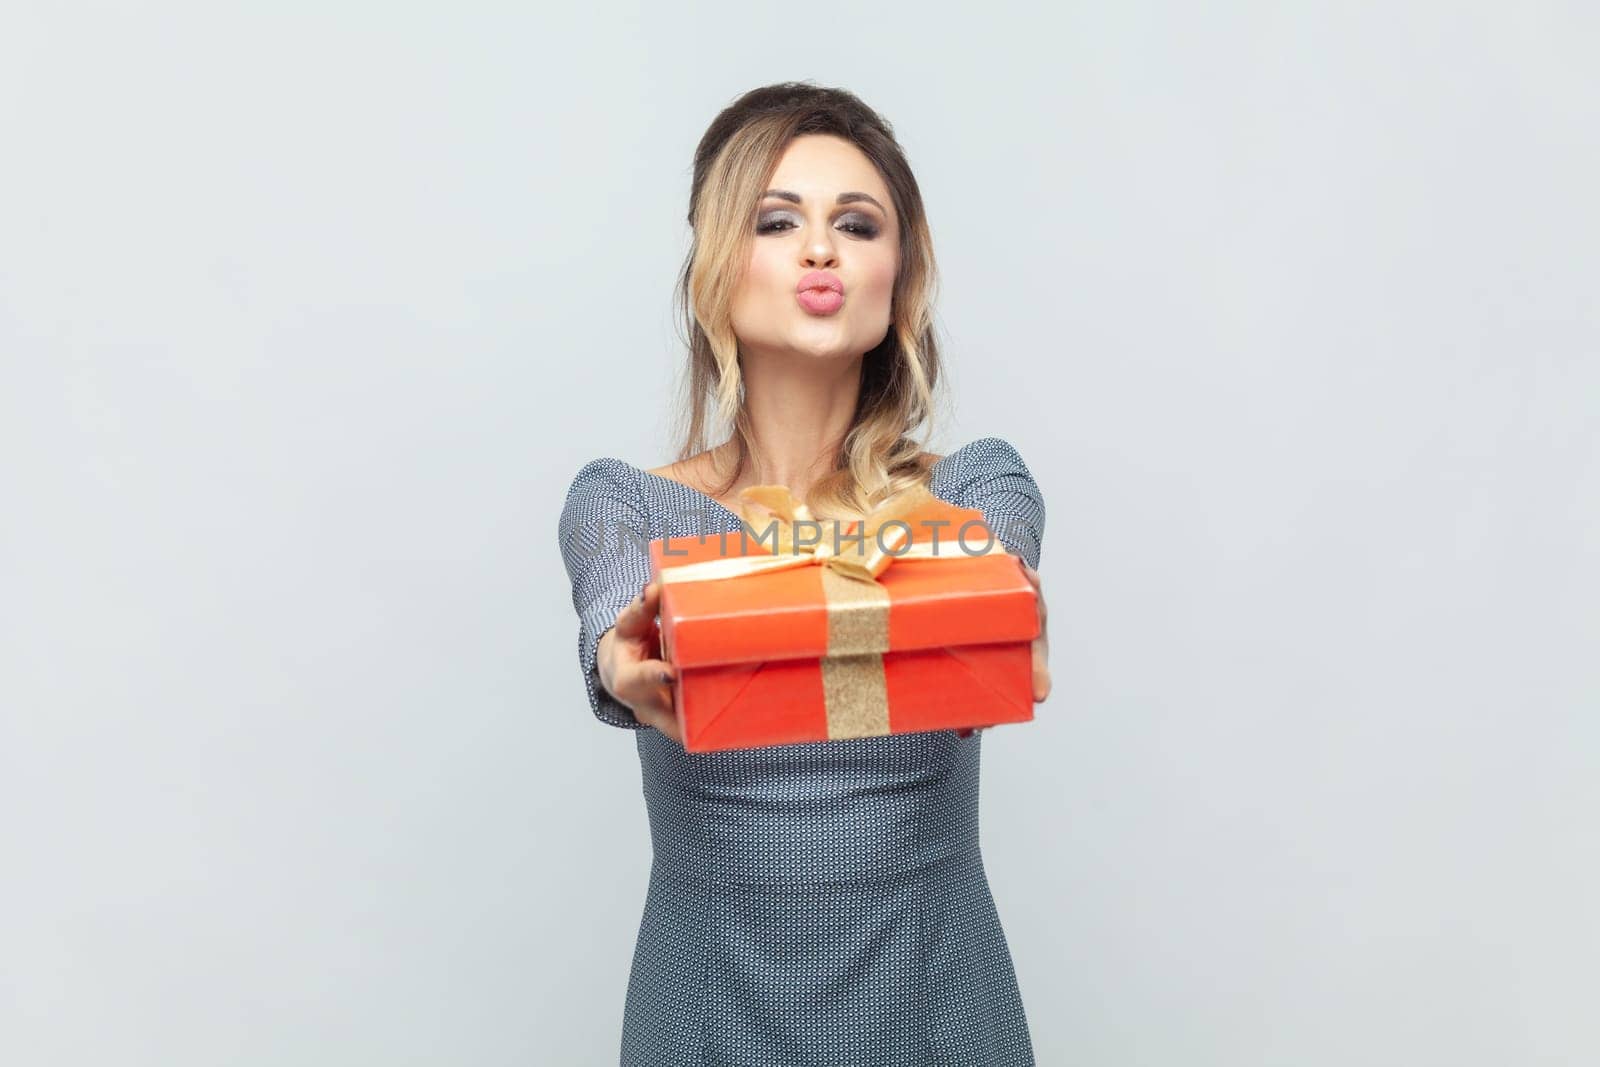 Portrait of positive romantic blonde woman giving present for her husband on anniversary, sending air kiss, wearing grey elegant dress. Indoor studio shot isolated on gray background.